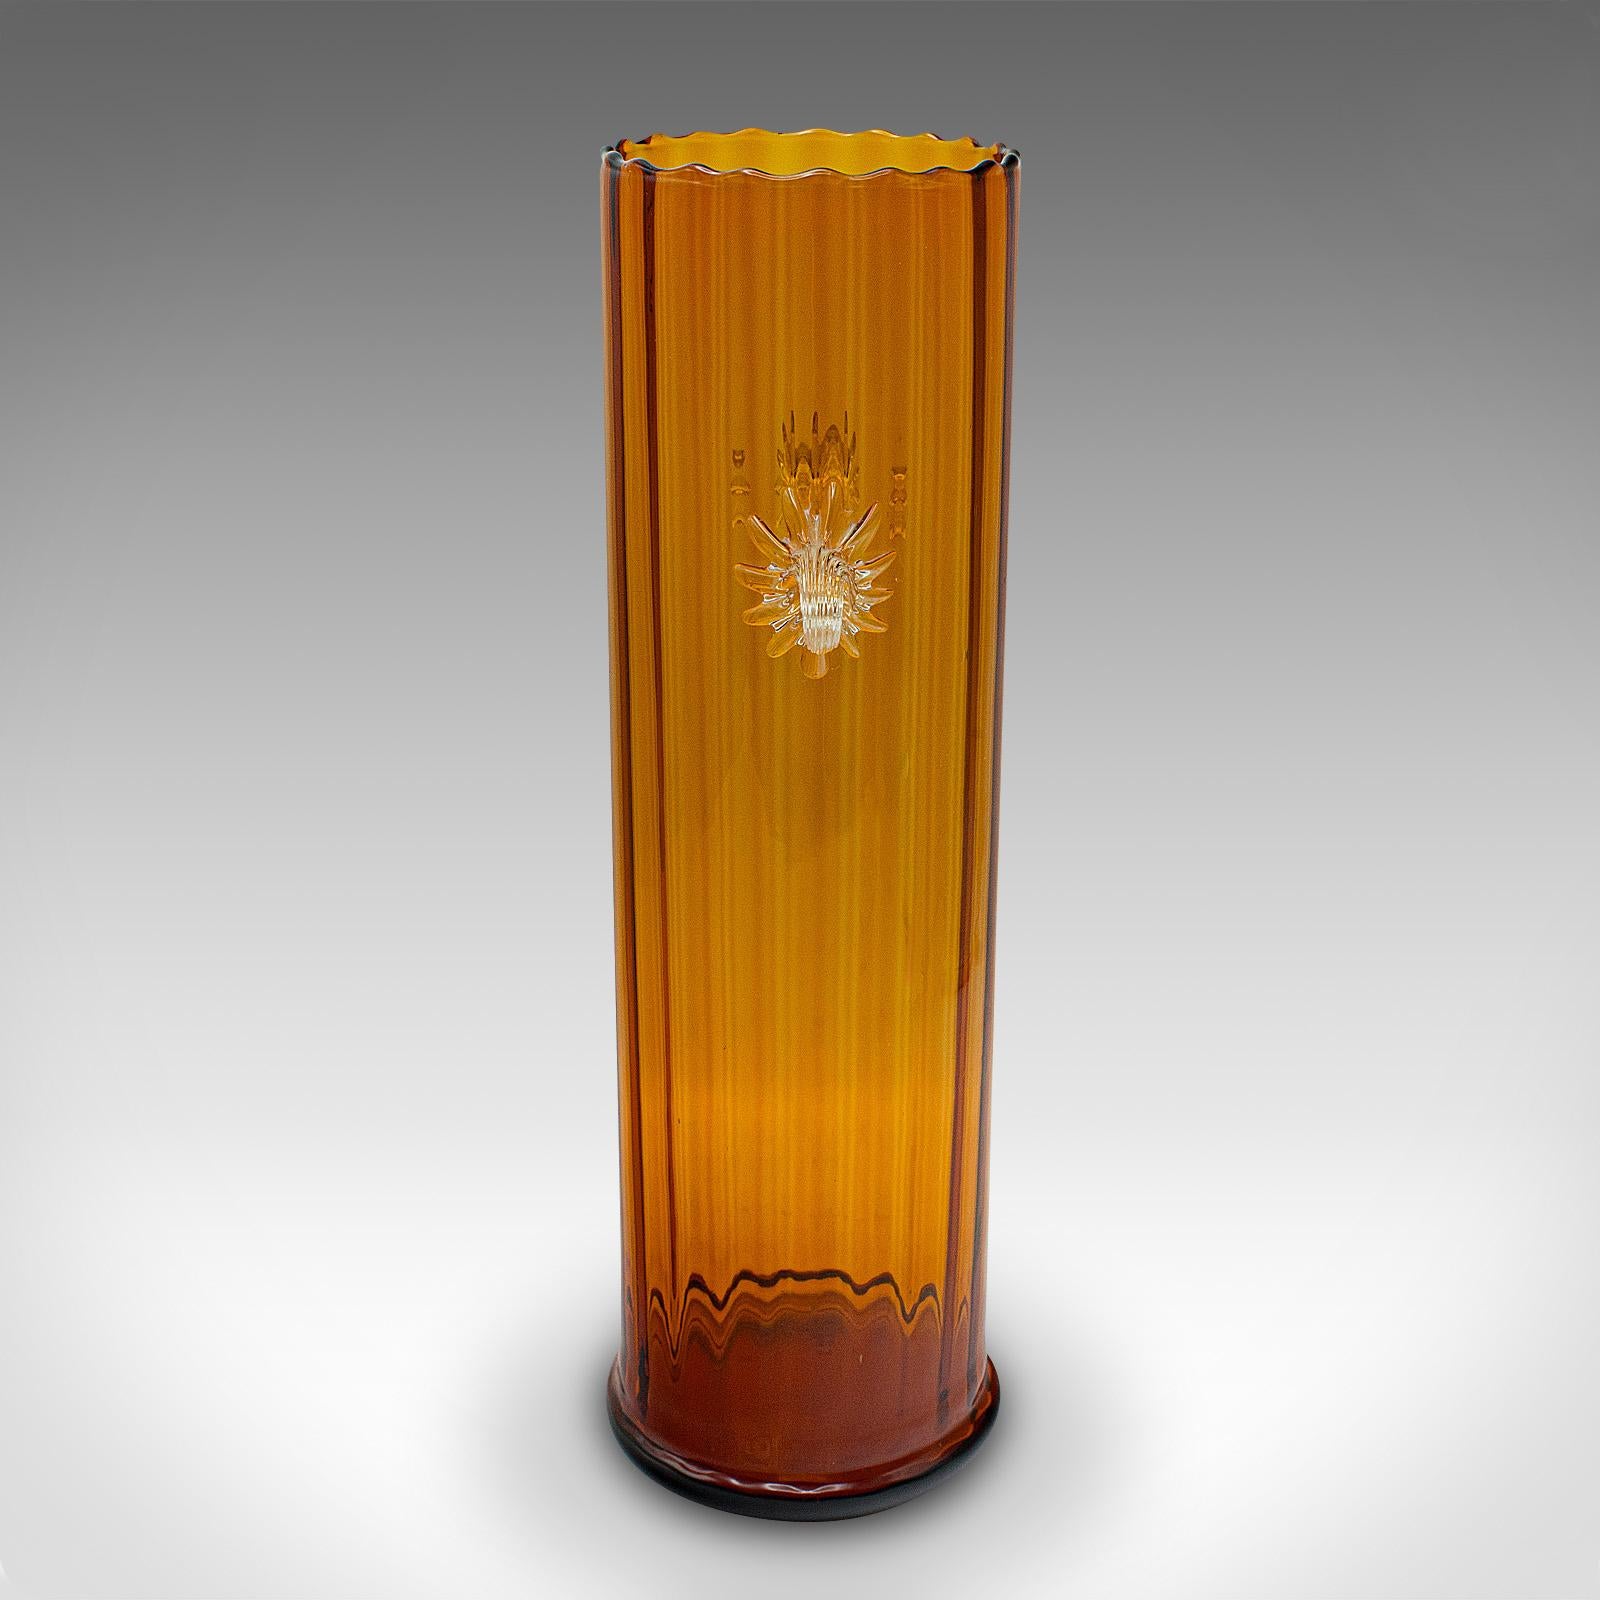 Tall Vintage Ribbed Vase, French, Art Glass, Flower Sleeve, Art Deco, Circa 1930 In Good Condition For Sale In Hele, Devon, GB